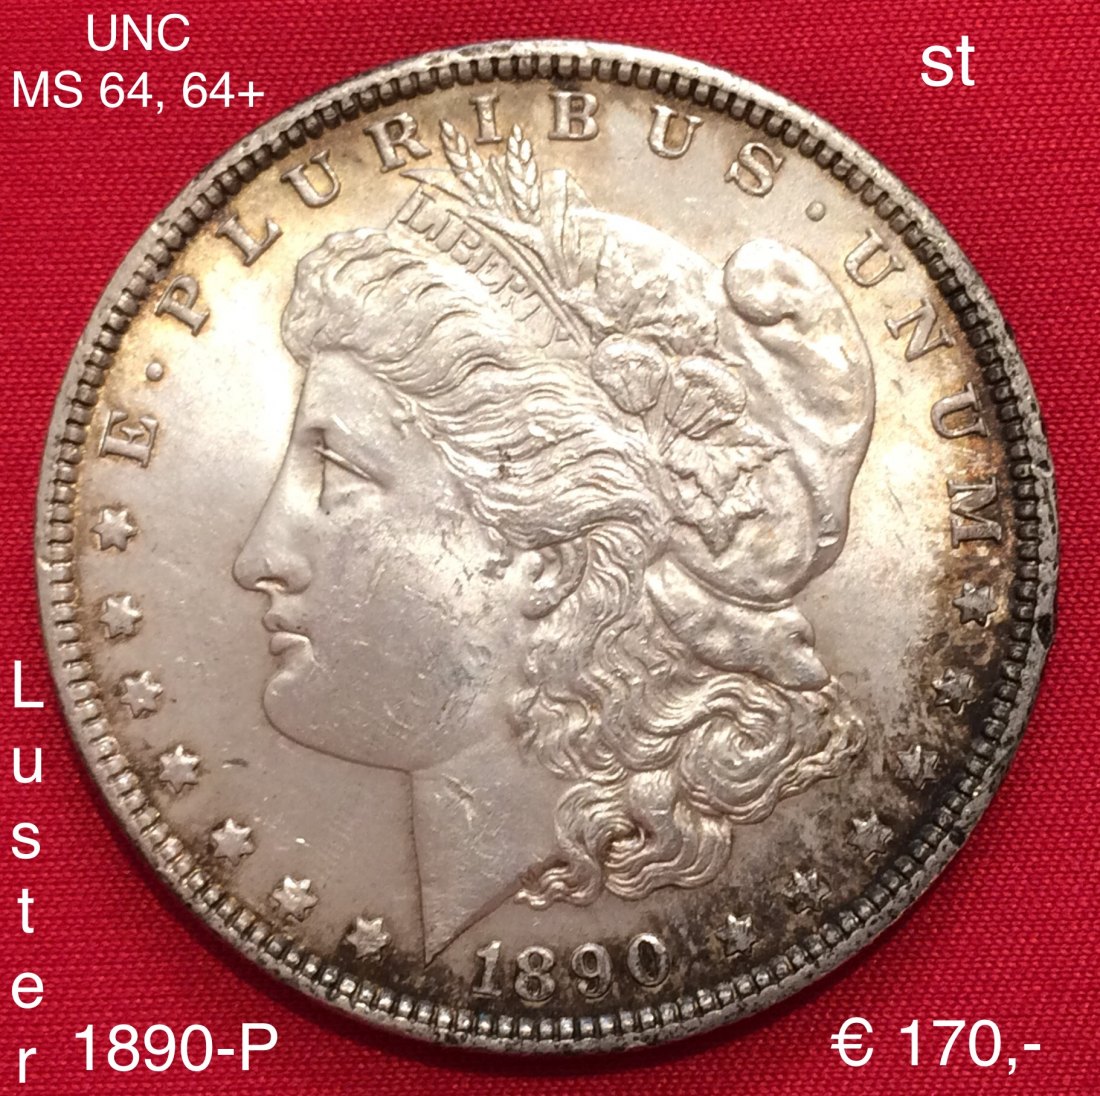  USA 1890-P Morgan Silver Dollar st / UNC MS 64 64+ with flashy and bright Mint Luster   